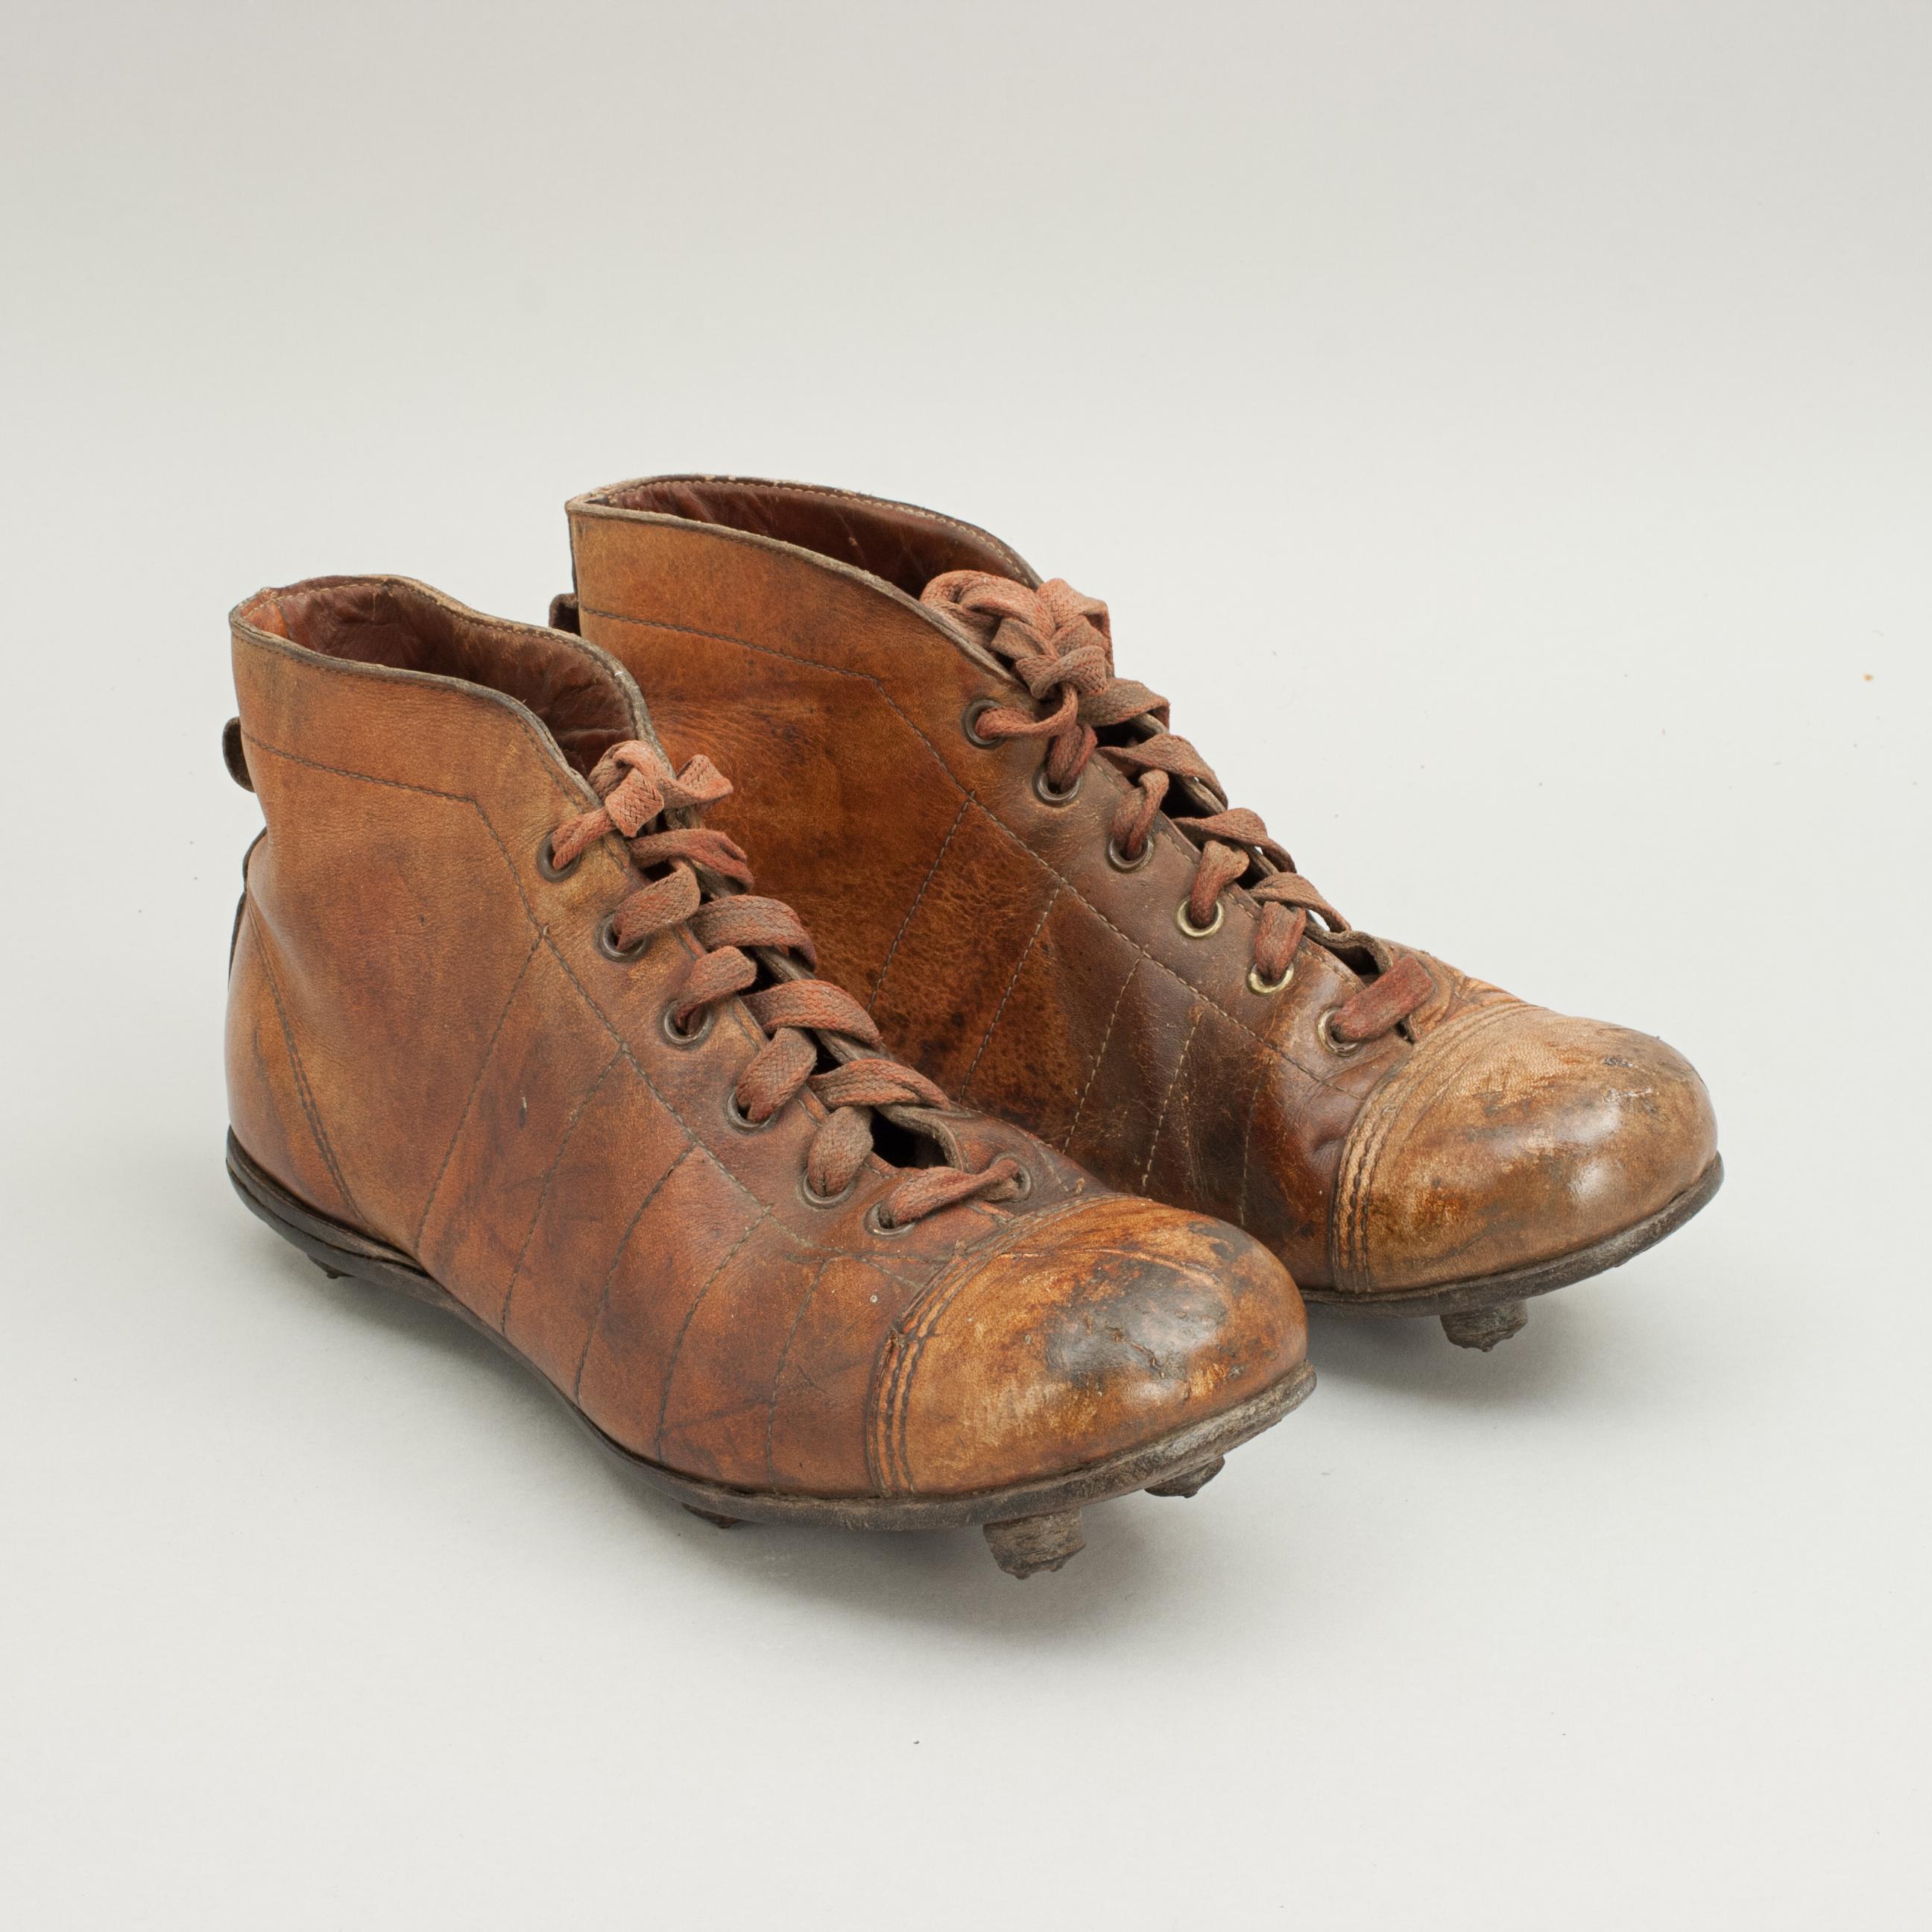 English Vintage Leather Football Boots or Rugby Boots